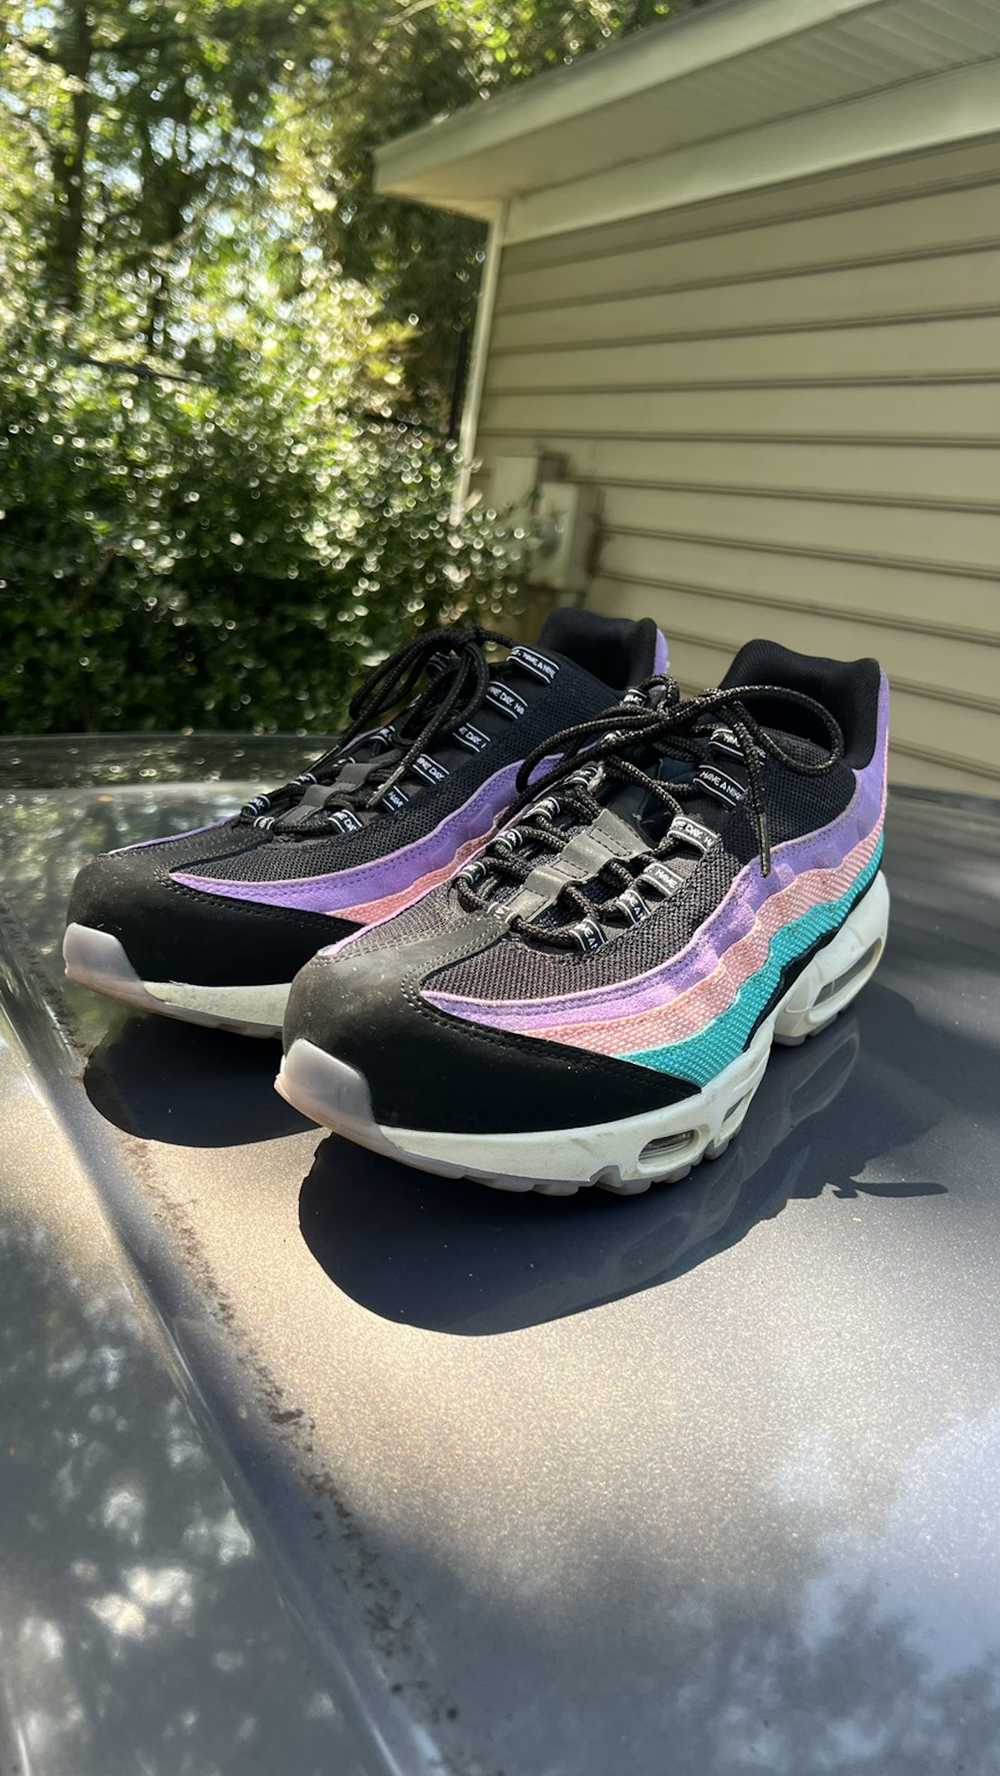 Nike × Streetwear Air Max 95 Have A Nike Day 2019 - image 2